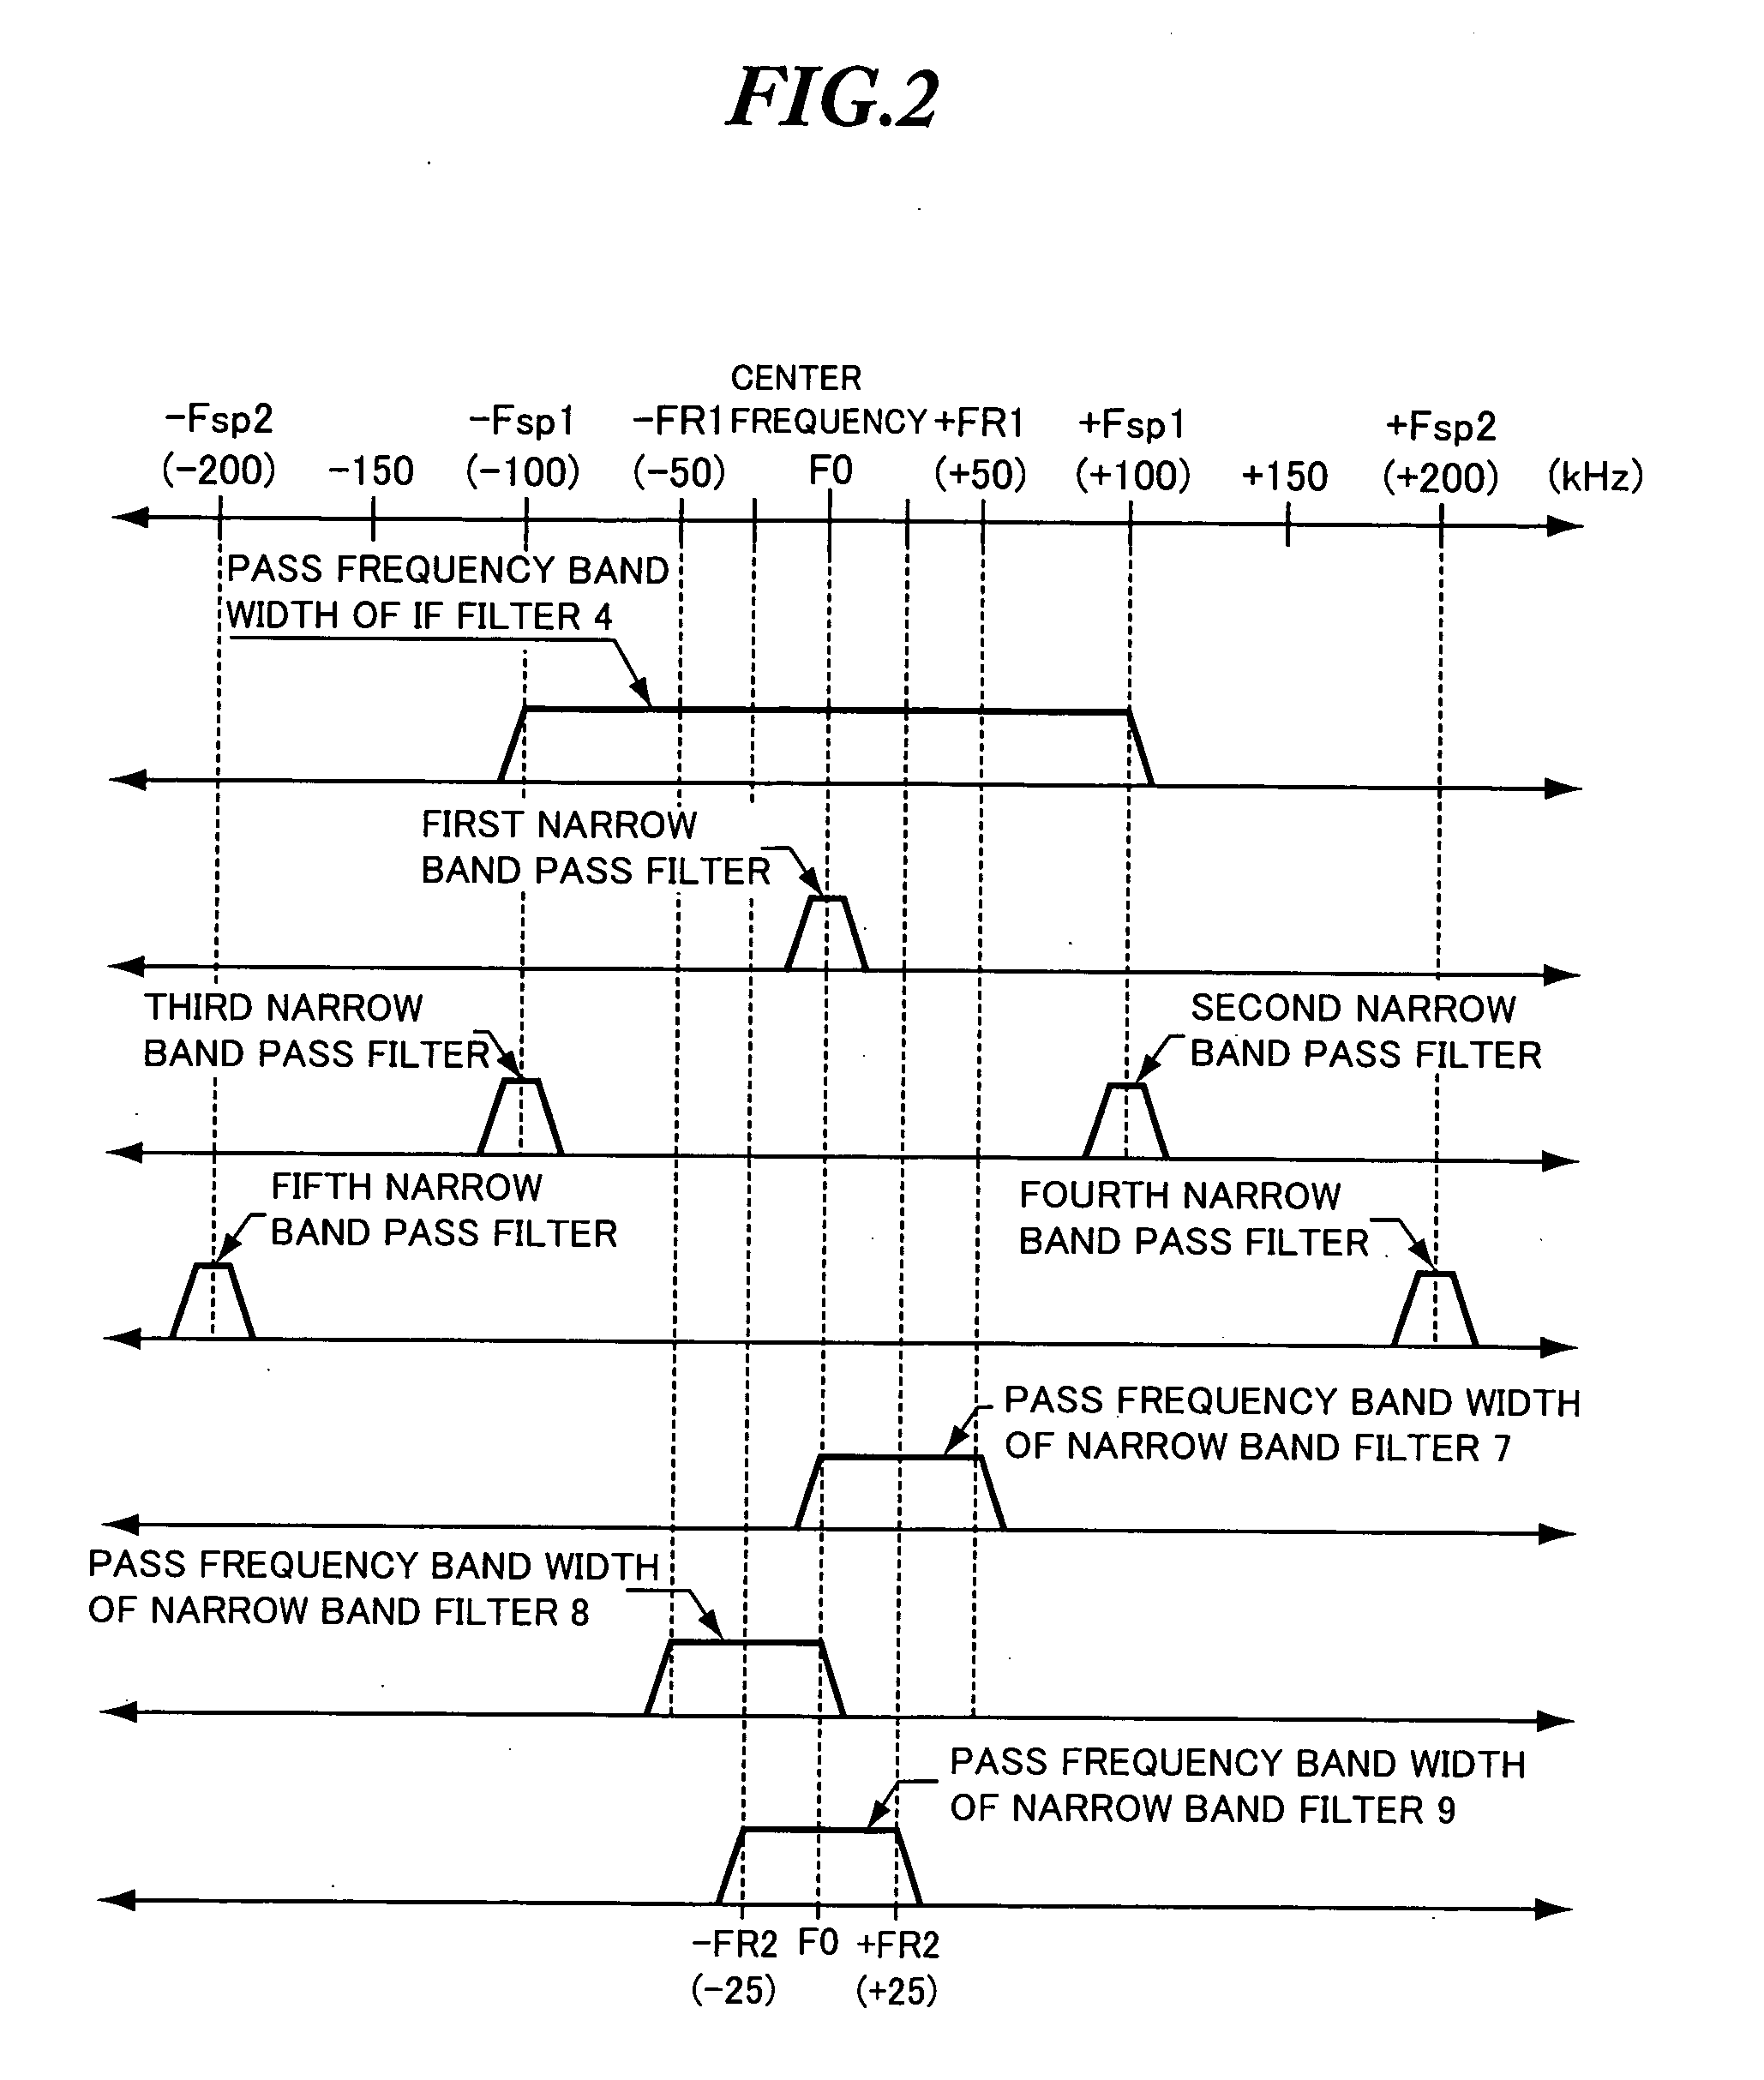 Adjacent interference removal device